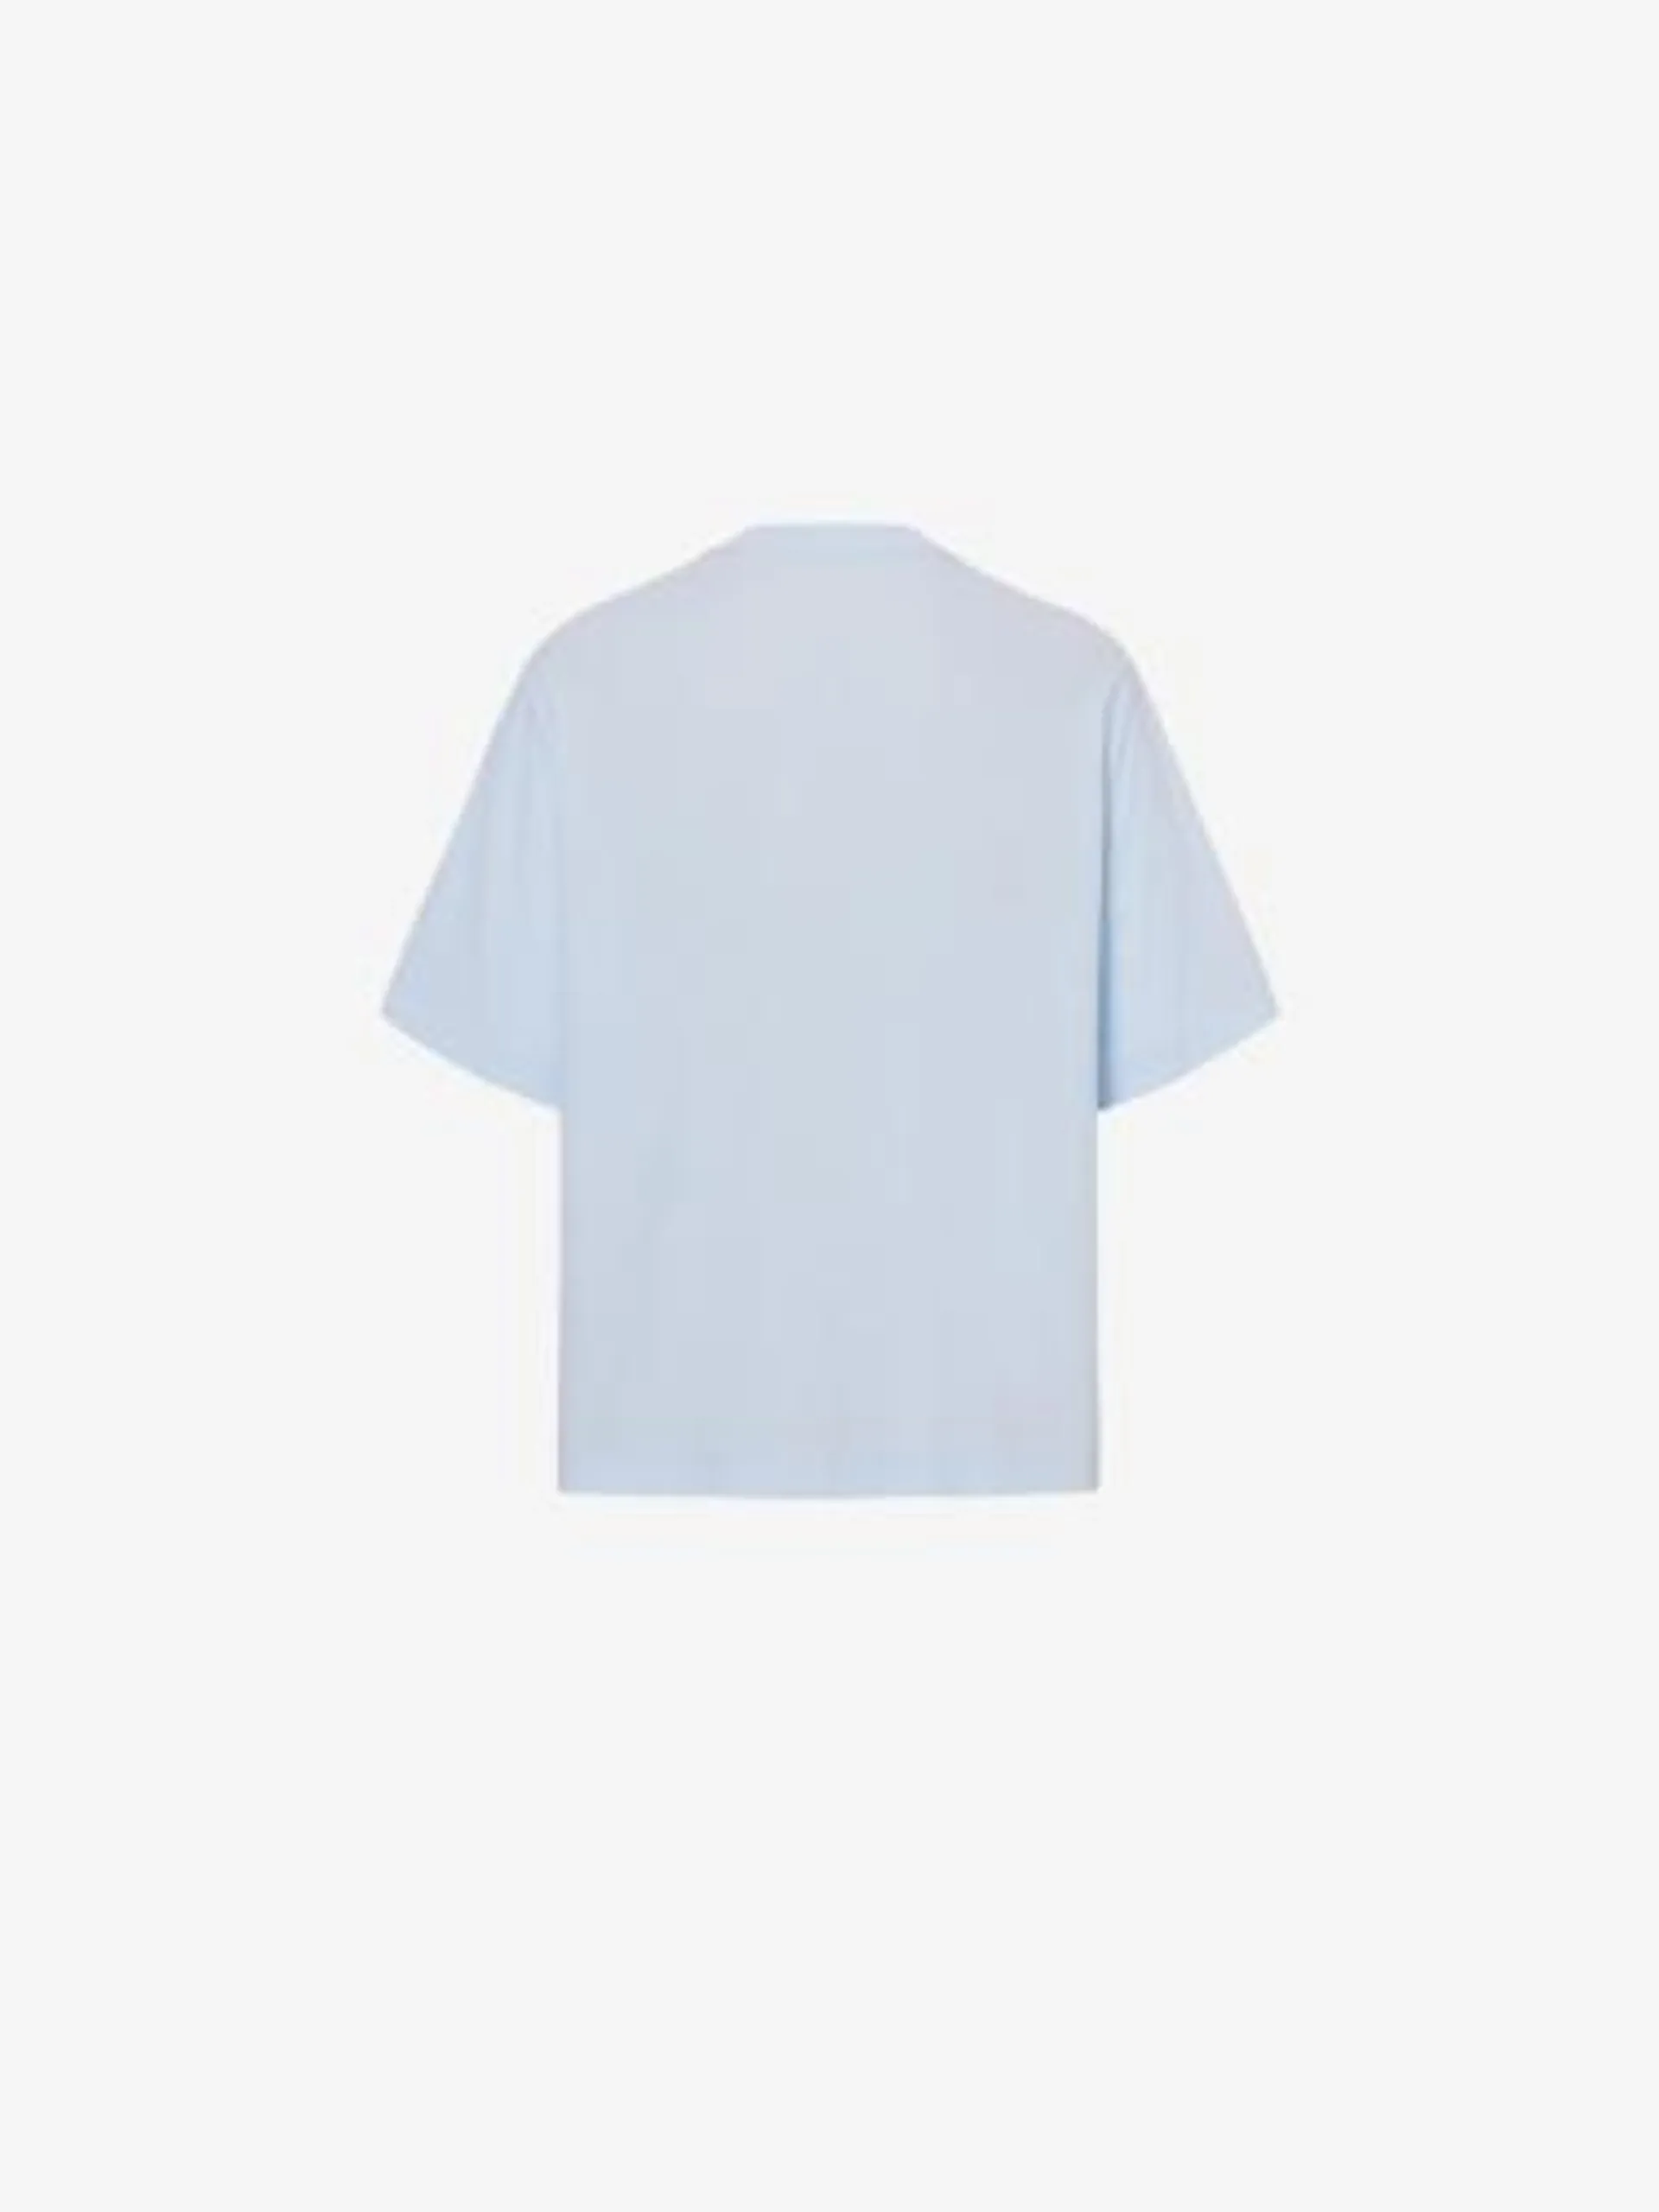 ASTRO TEE-SHIRT IN BLUE COTTON